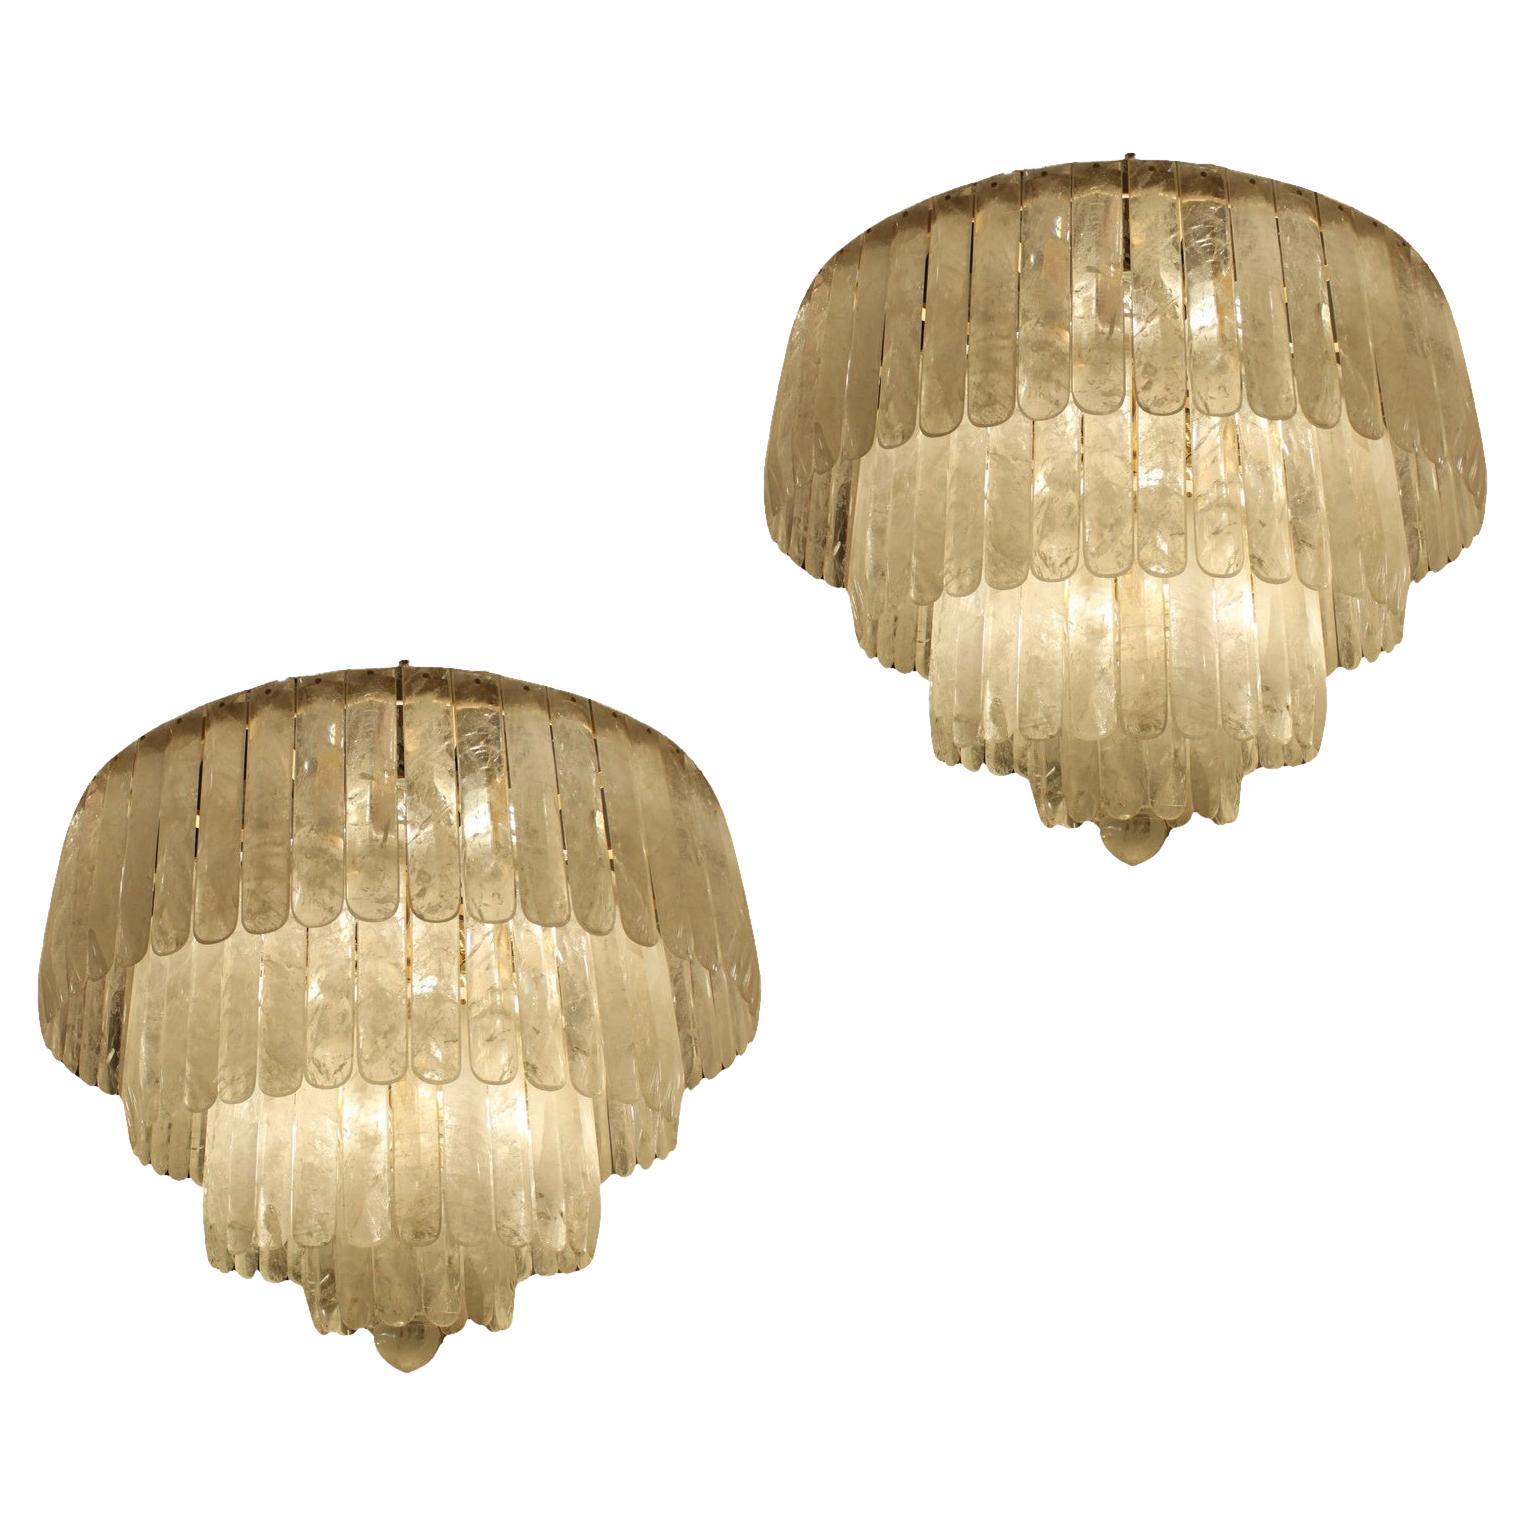 Spectacular Pair of Circular Tiered Rock Crystal Chandeliers